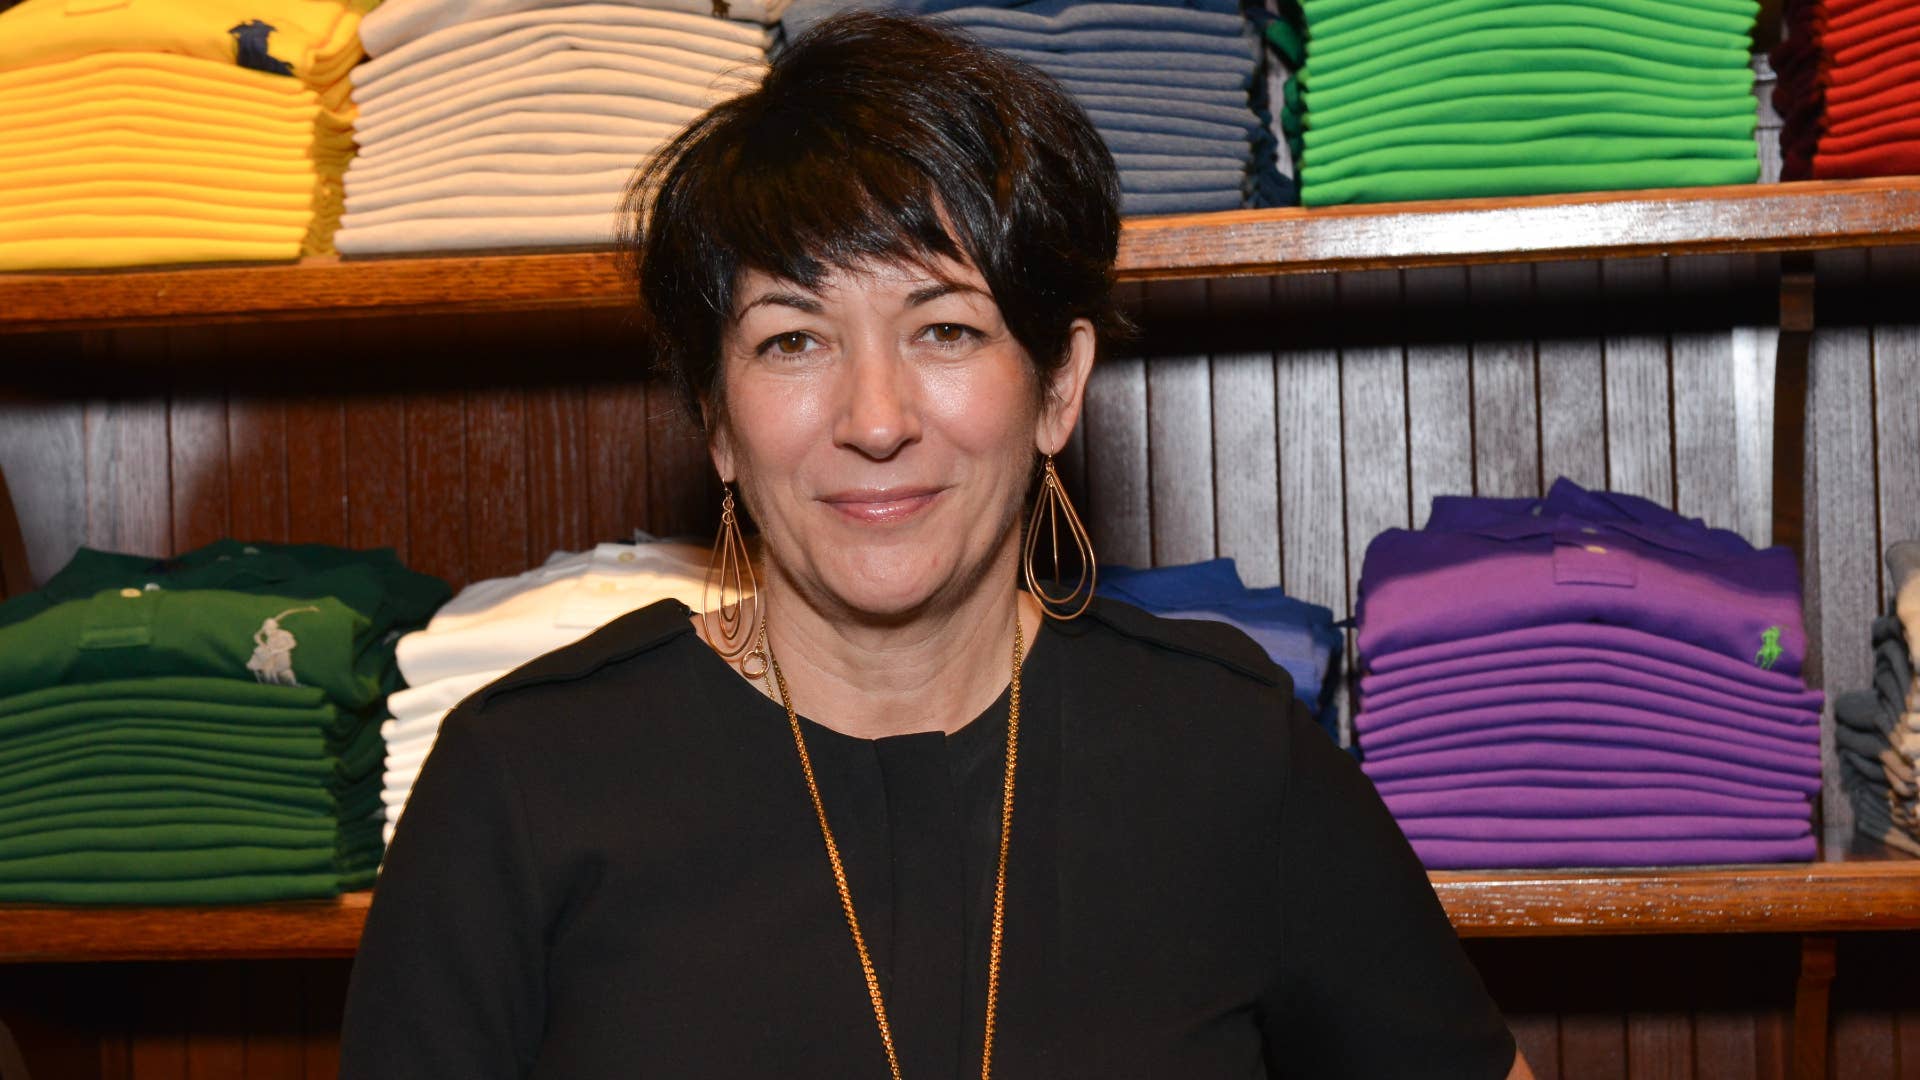 Ghislaine Maxwell is pictured at an event